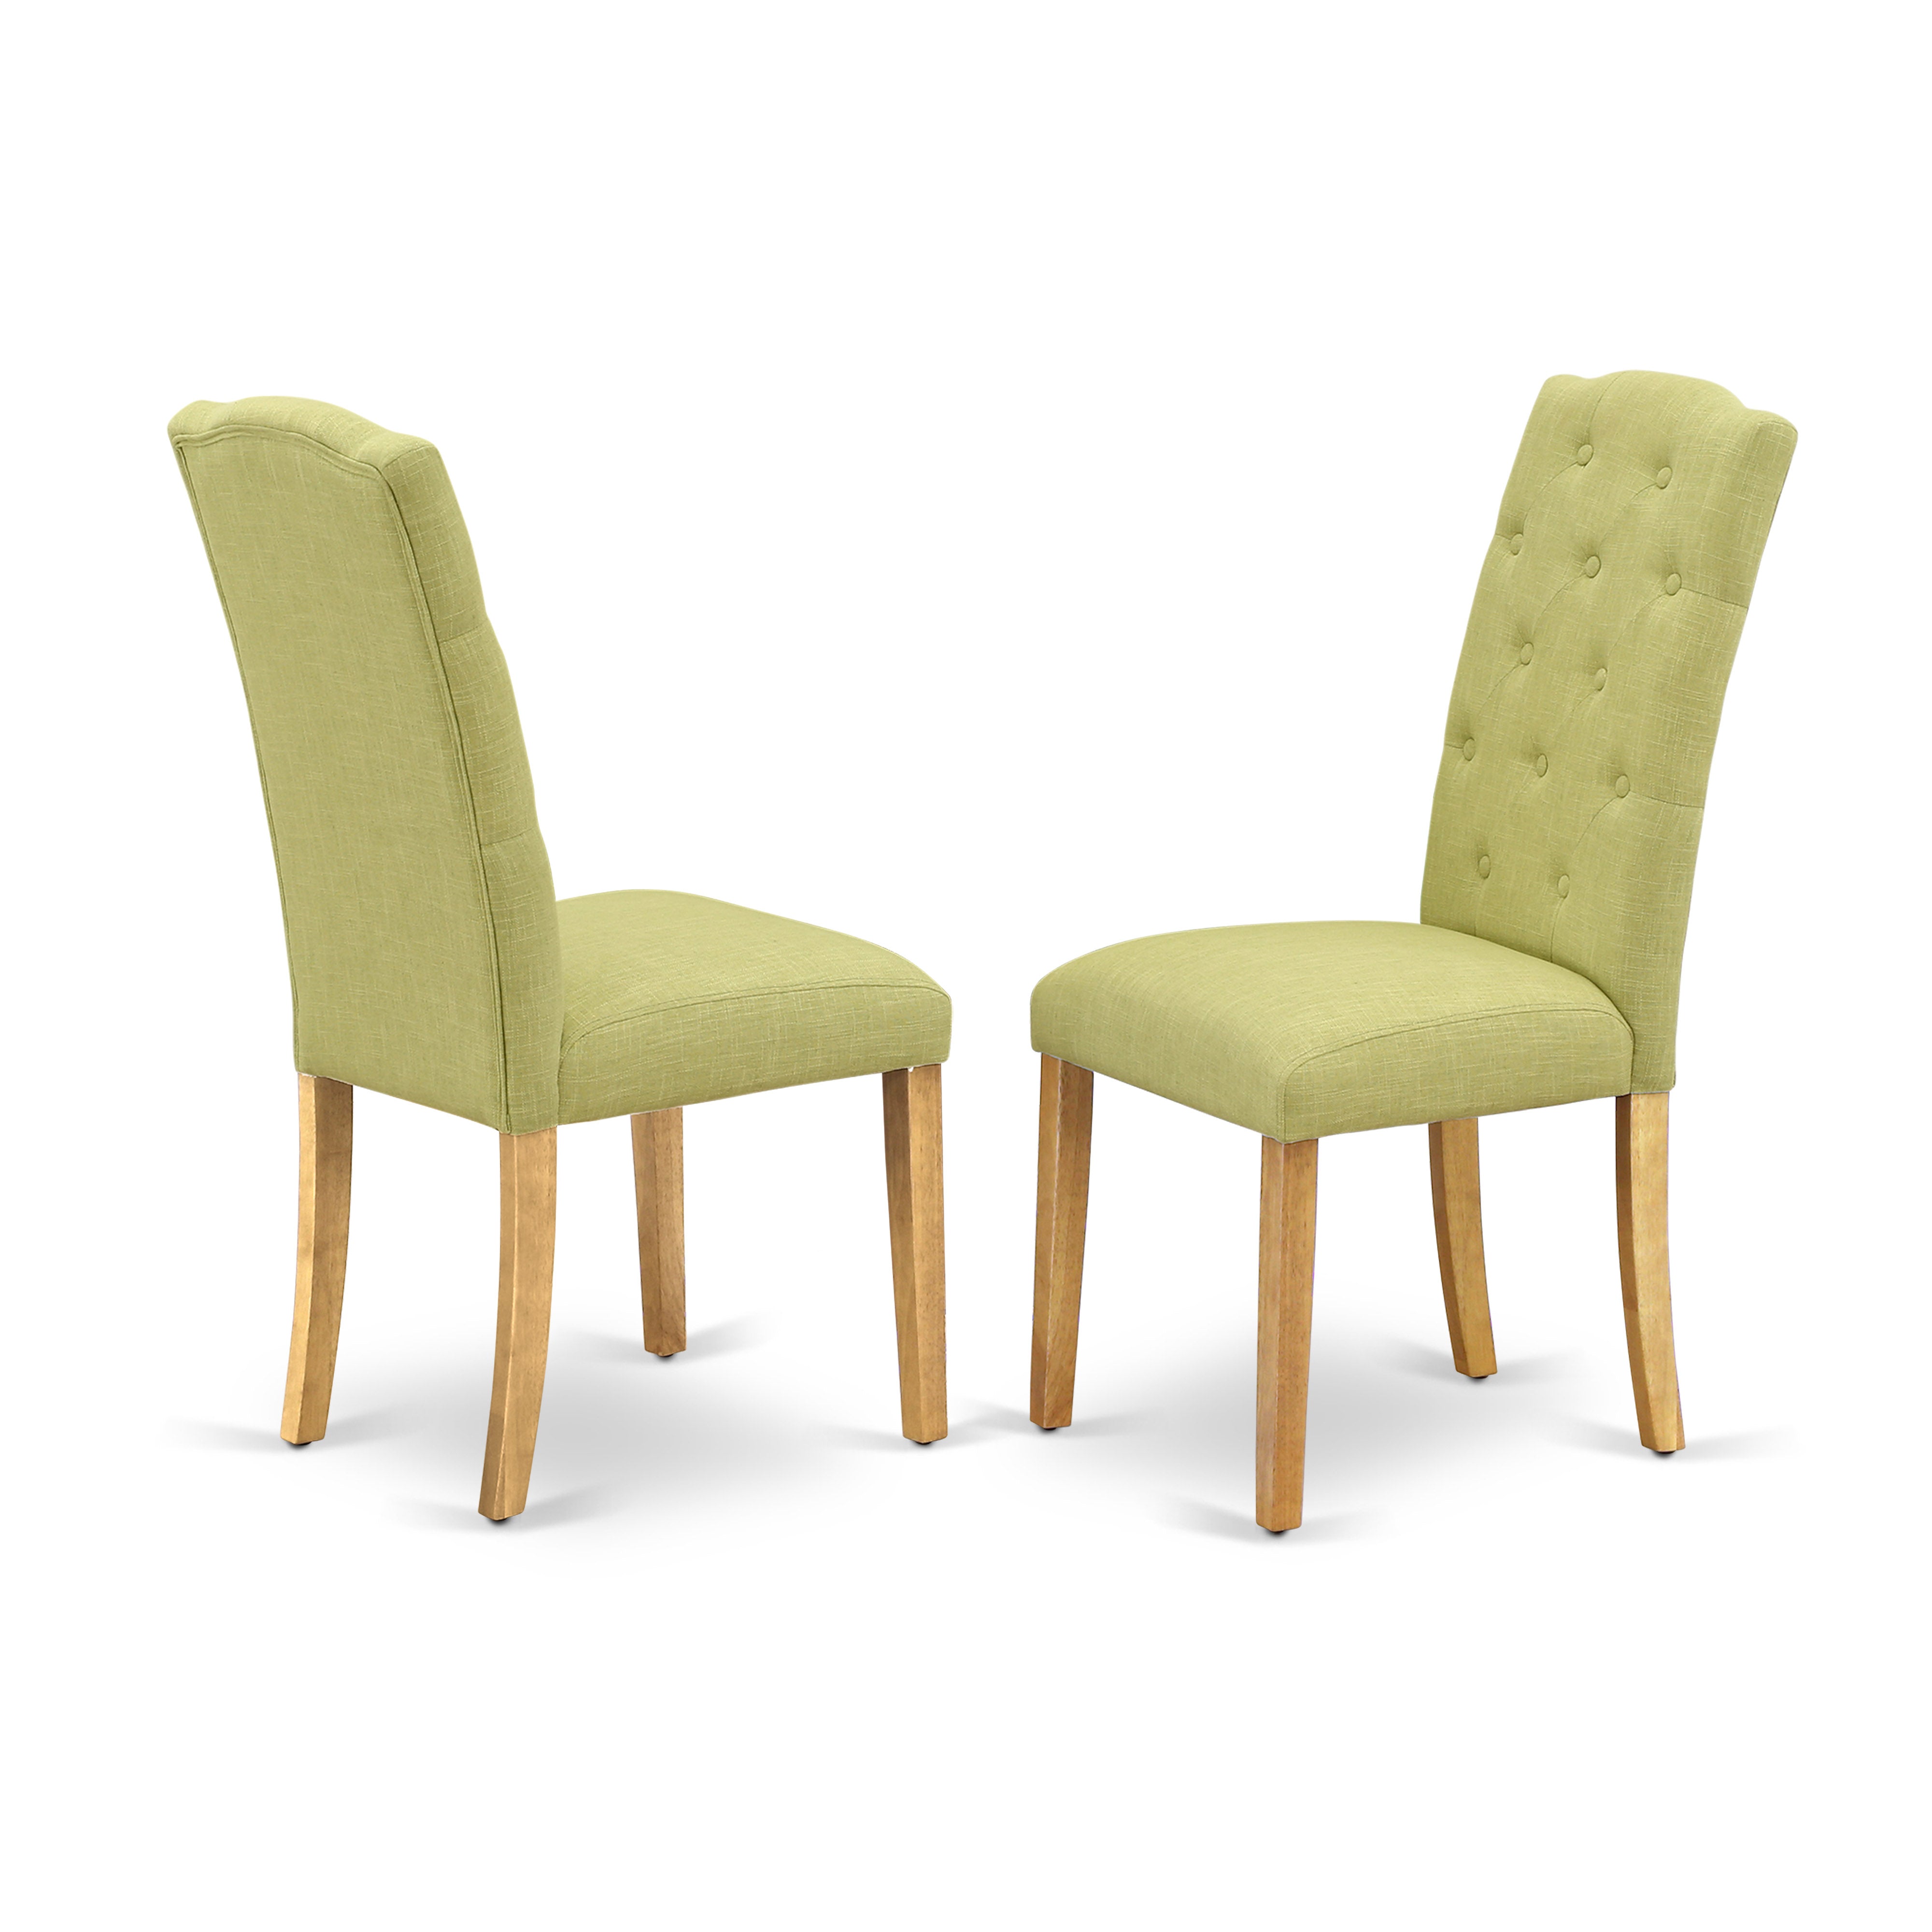 CEP4T07 Celina Parson Chair With Oak Leg And Linen Fabric Limelight